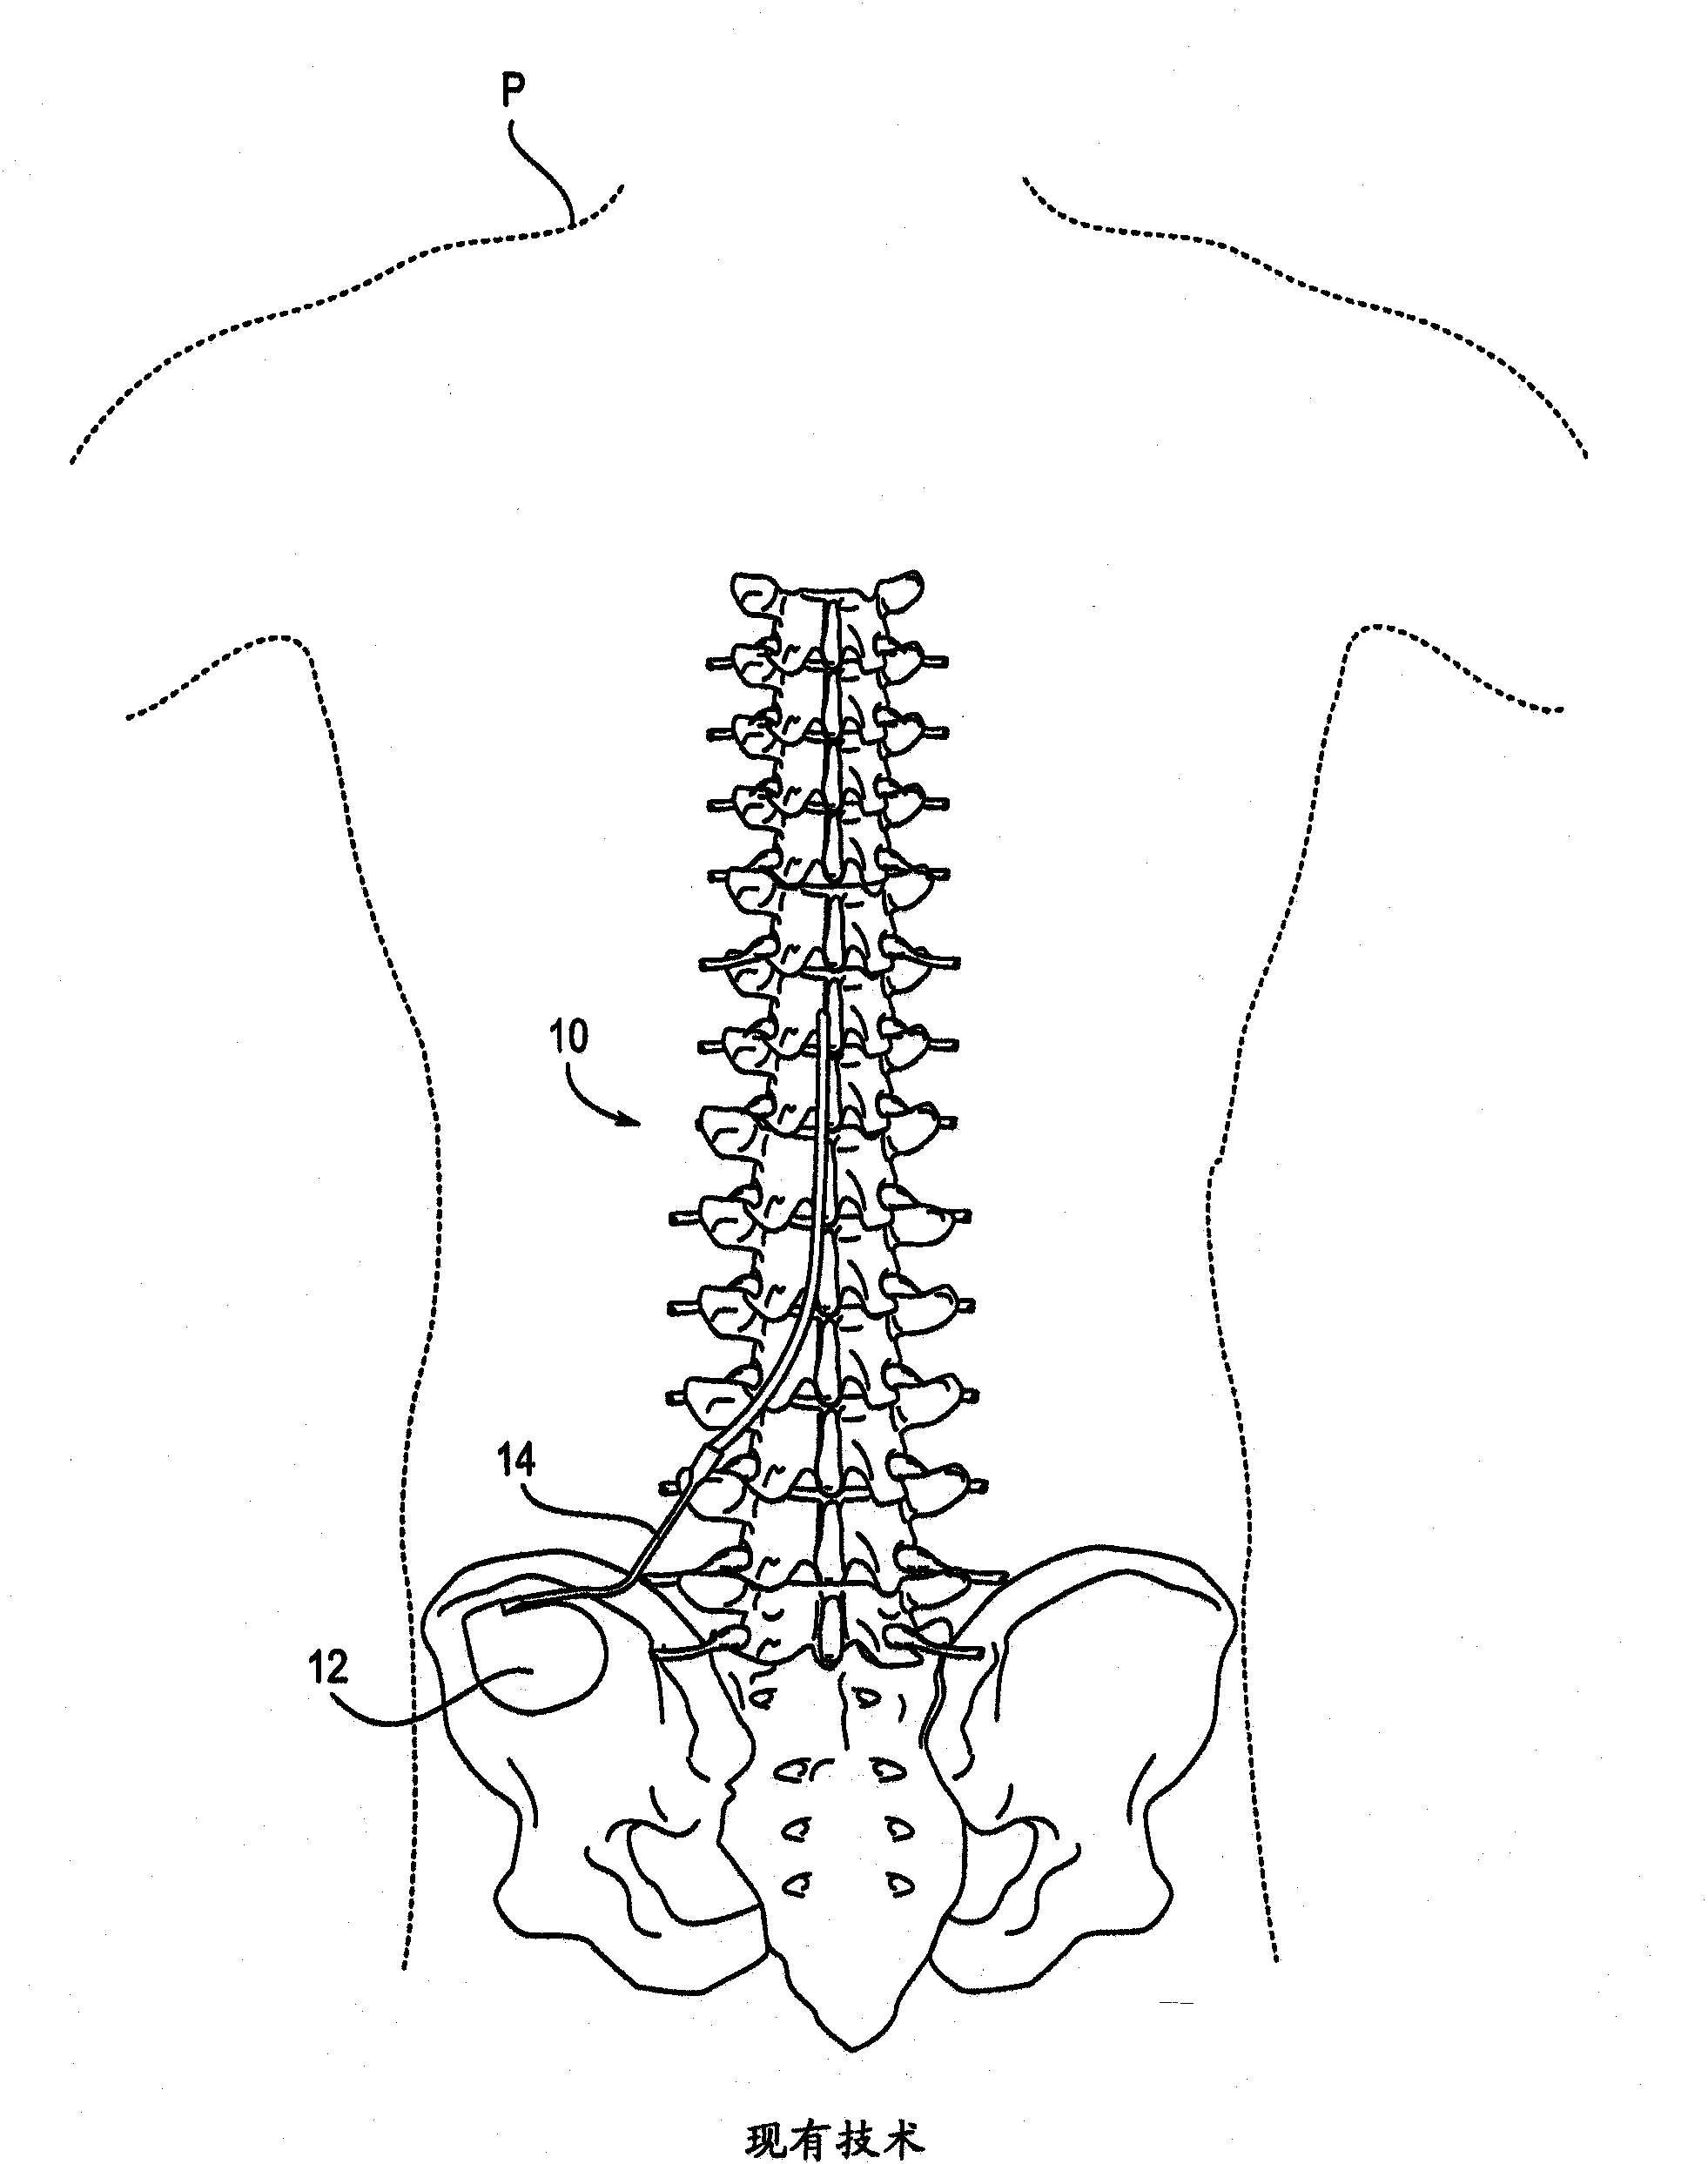 Stimulation leads, delivery systems and methods of use